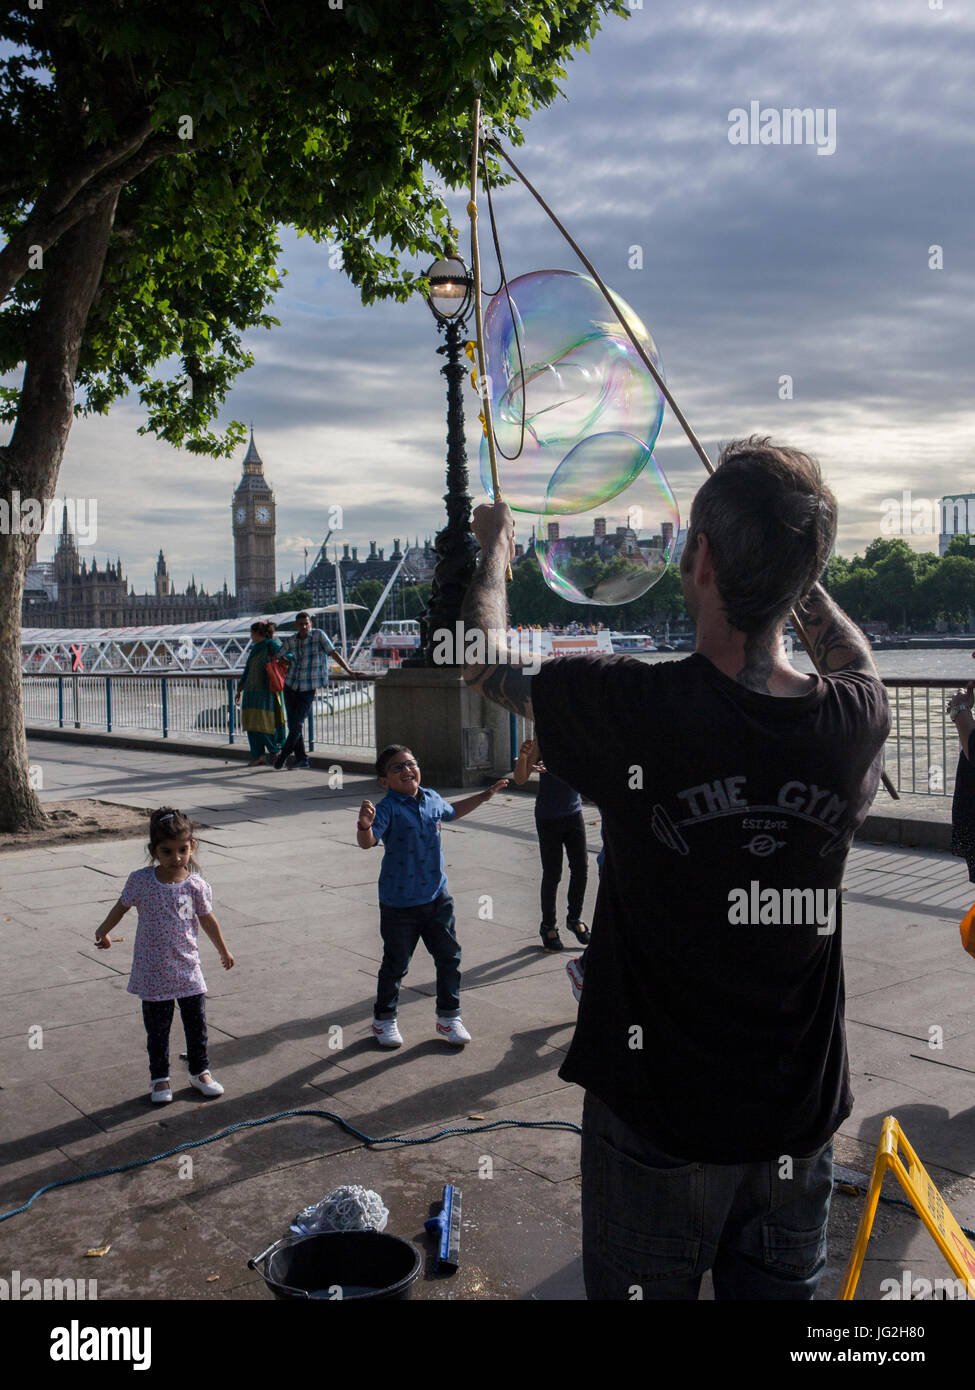 A street busker blows bubbles on the South Bank of the River Thames in London with the Houses of Parliament and Big ben in the background Stock Photo